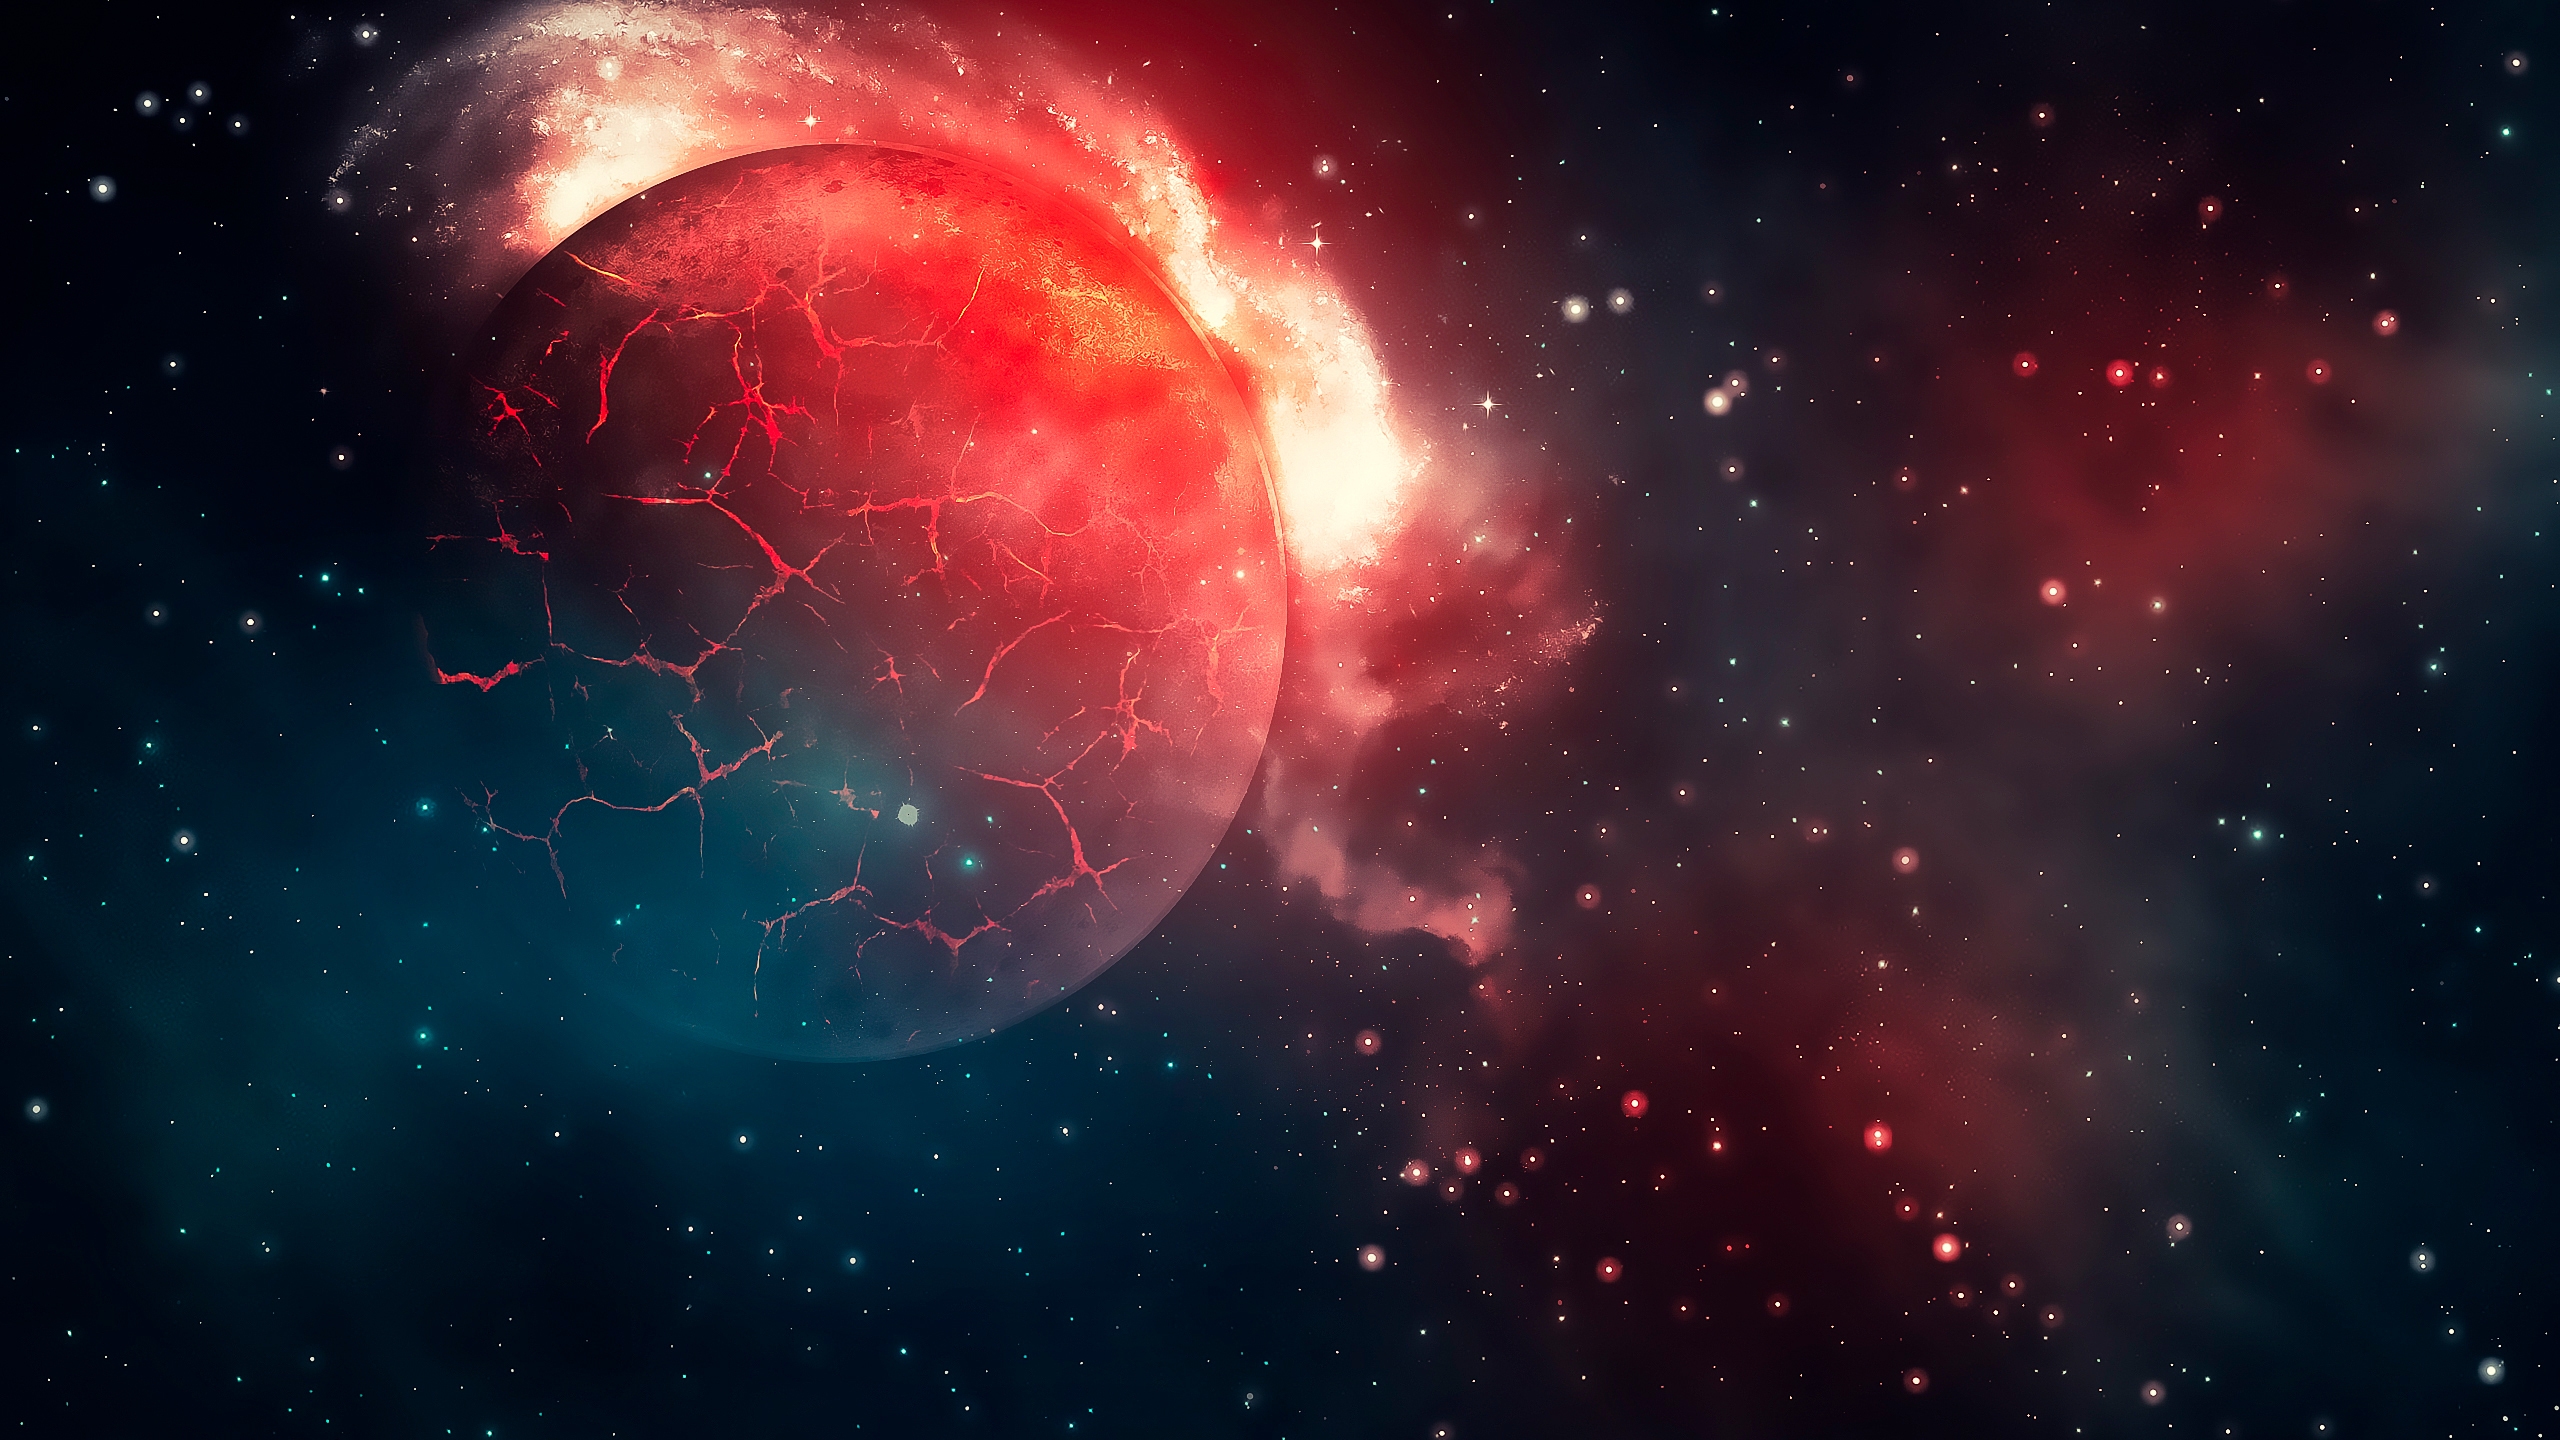 Space World Disaster for 2560x1440 HDTV resolution